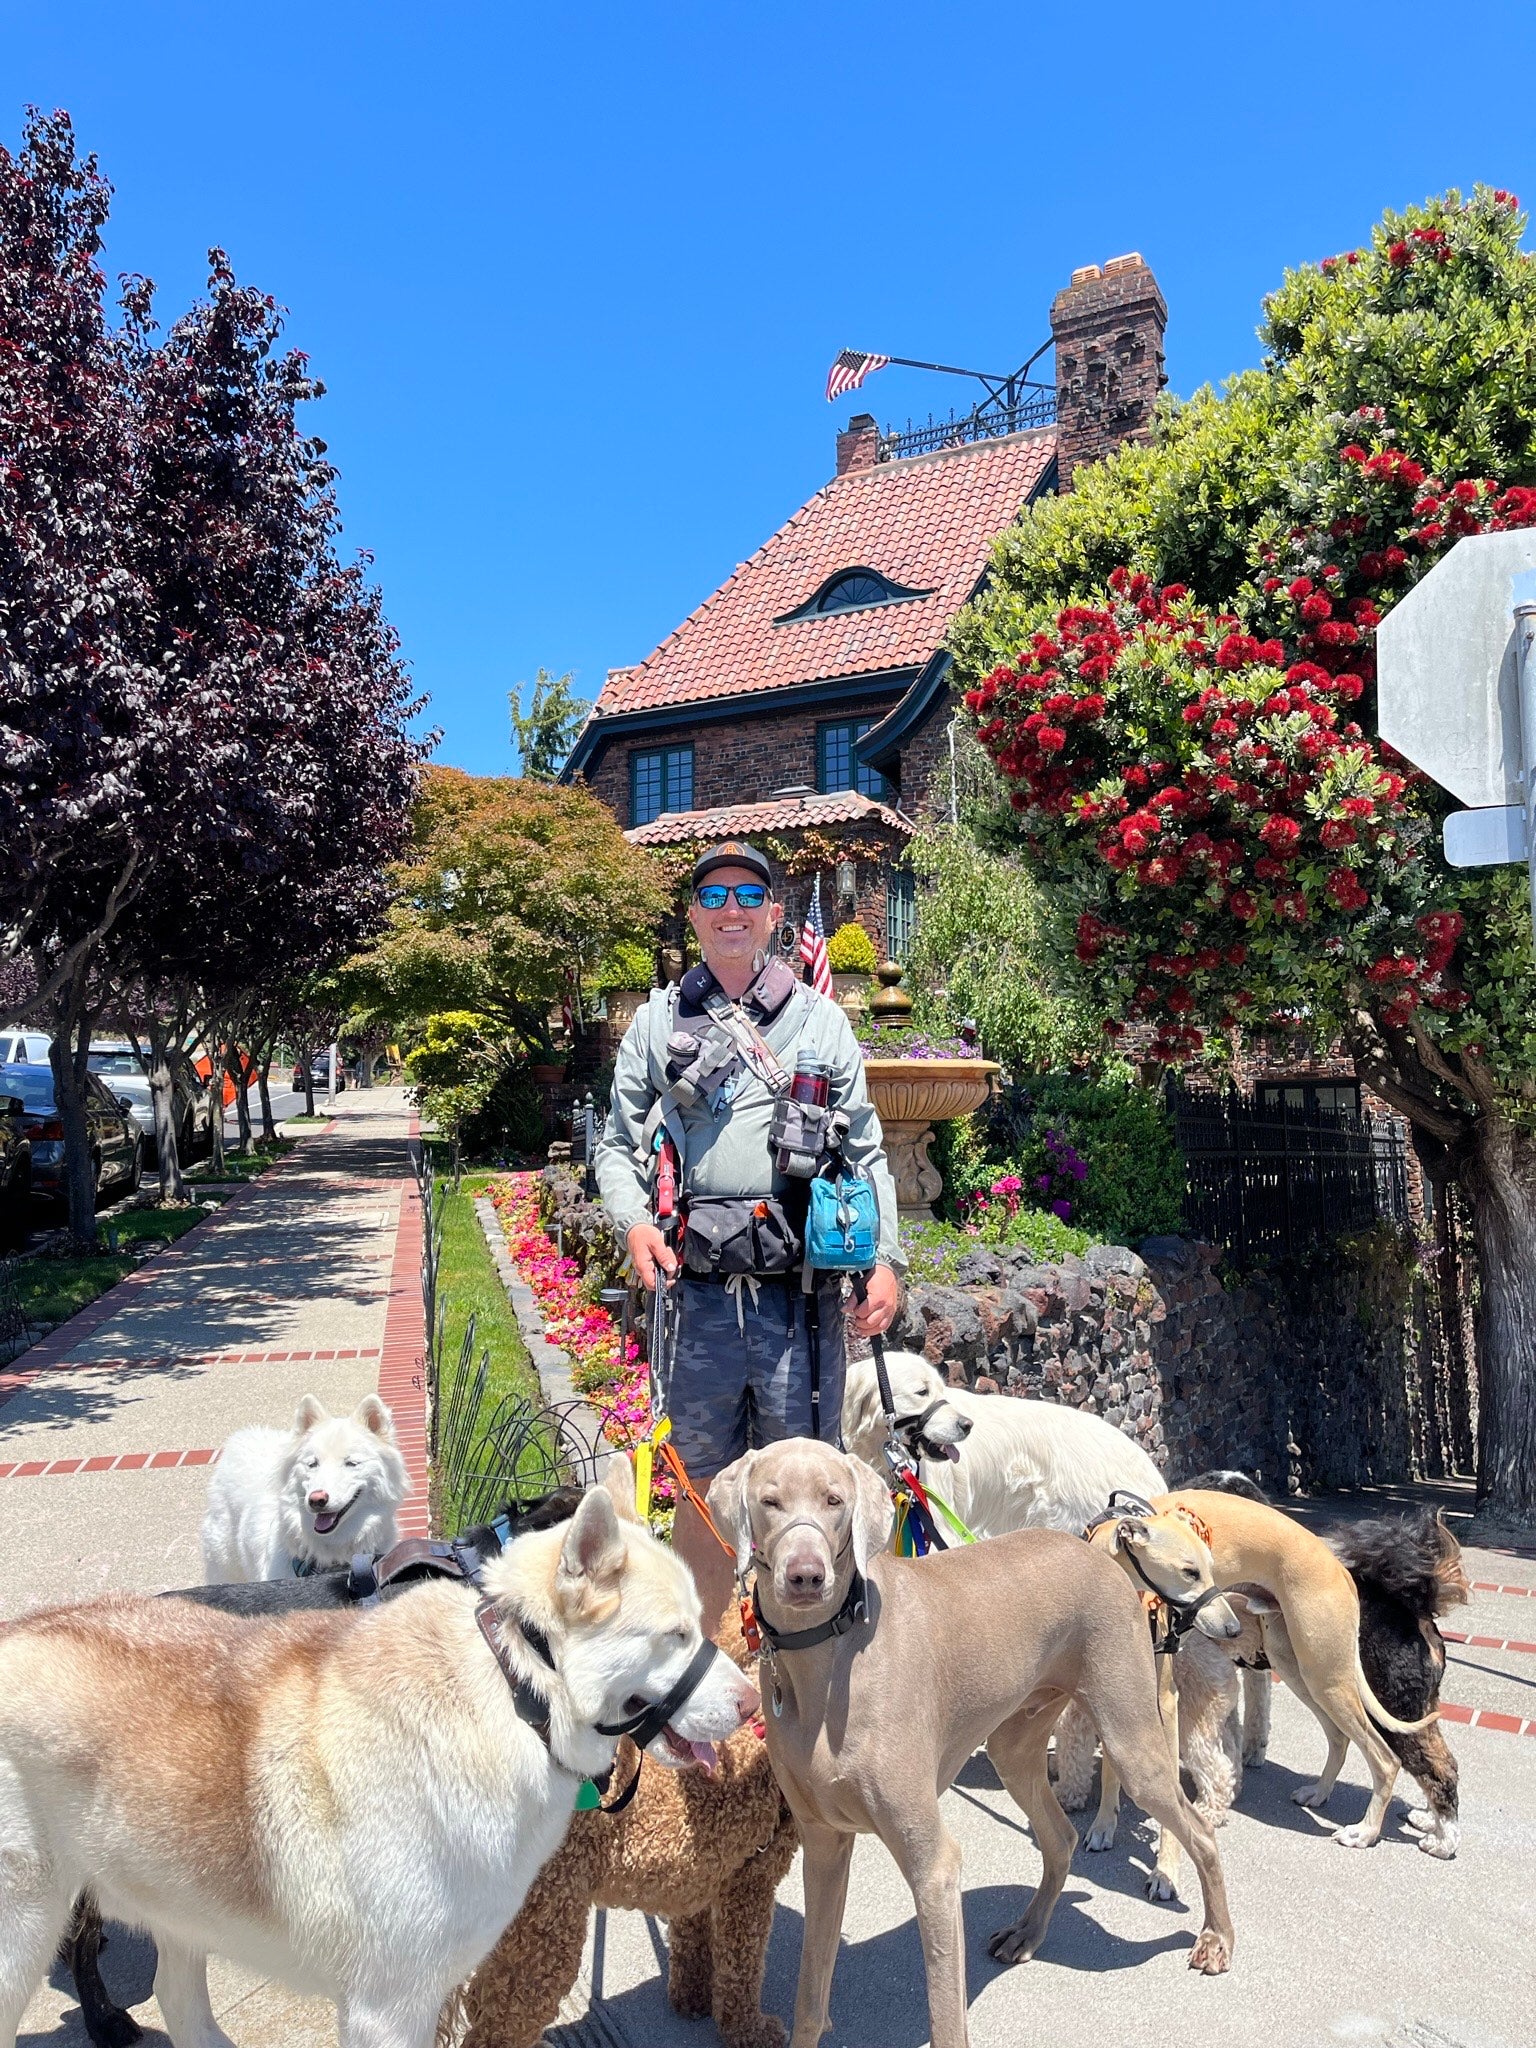 A smiling, male Caucasian dog walker stands behind his group of dogs. There are 8 dogs of different sizes and breeds. The area is residential with a blooming tree and large house in the background.